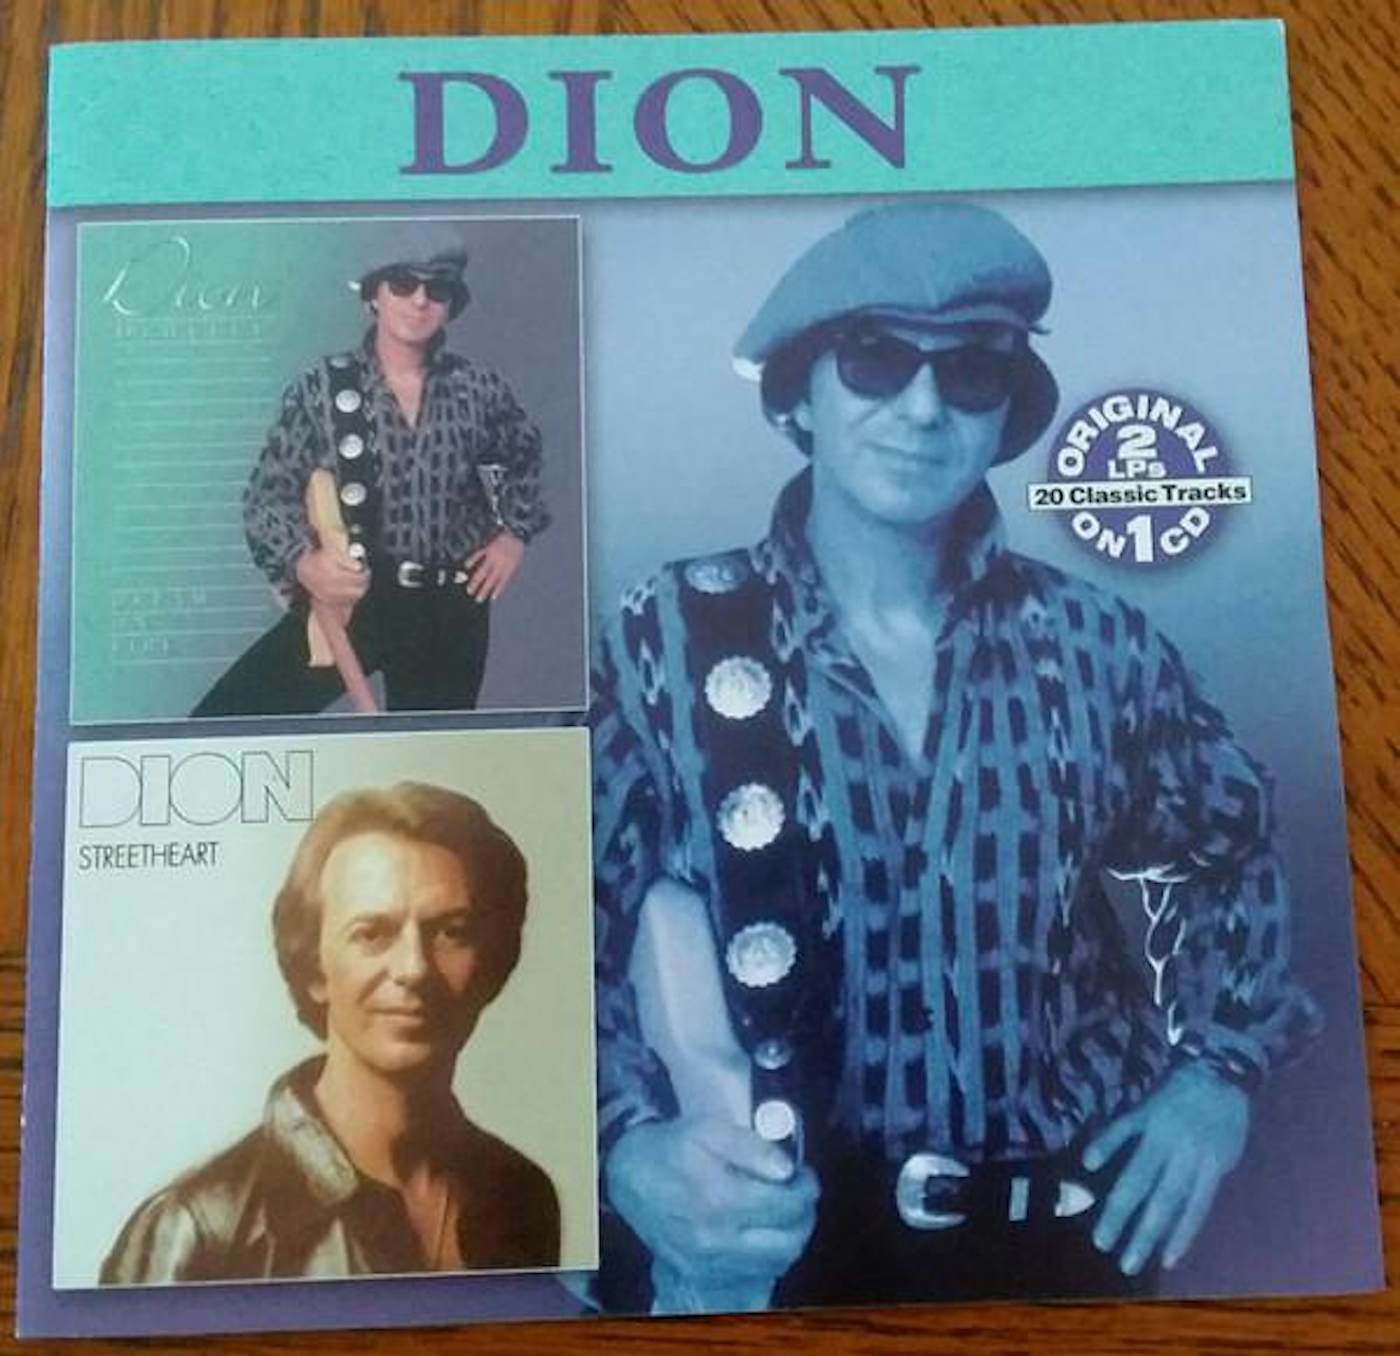 dream on fire / streethearts cd - Dion